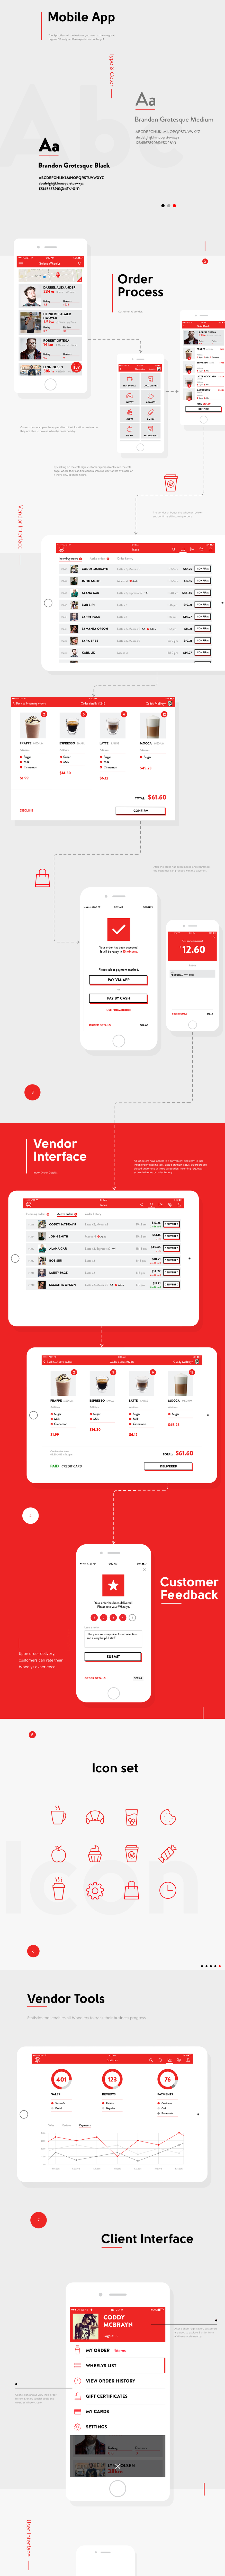 ios android app application cafe Coffee mpos payment customer merchant vendor user interface iphone iPad